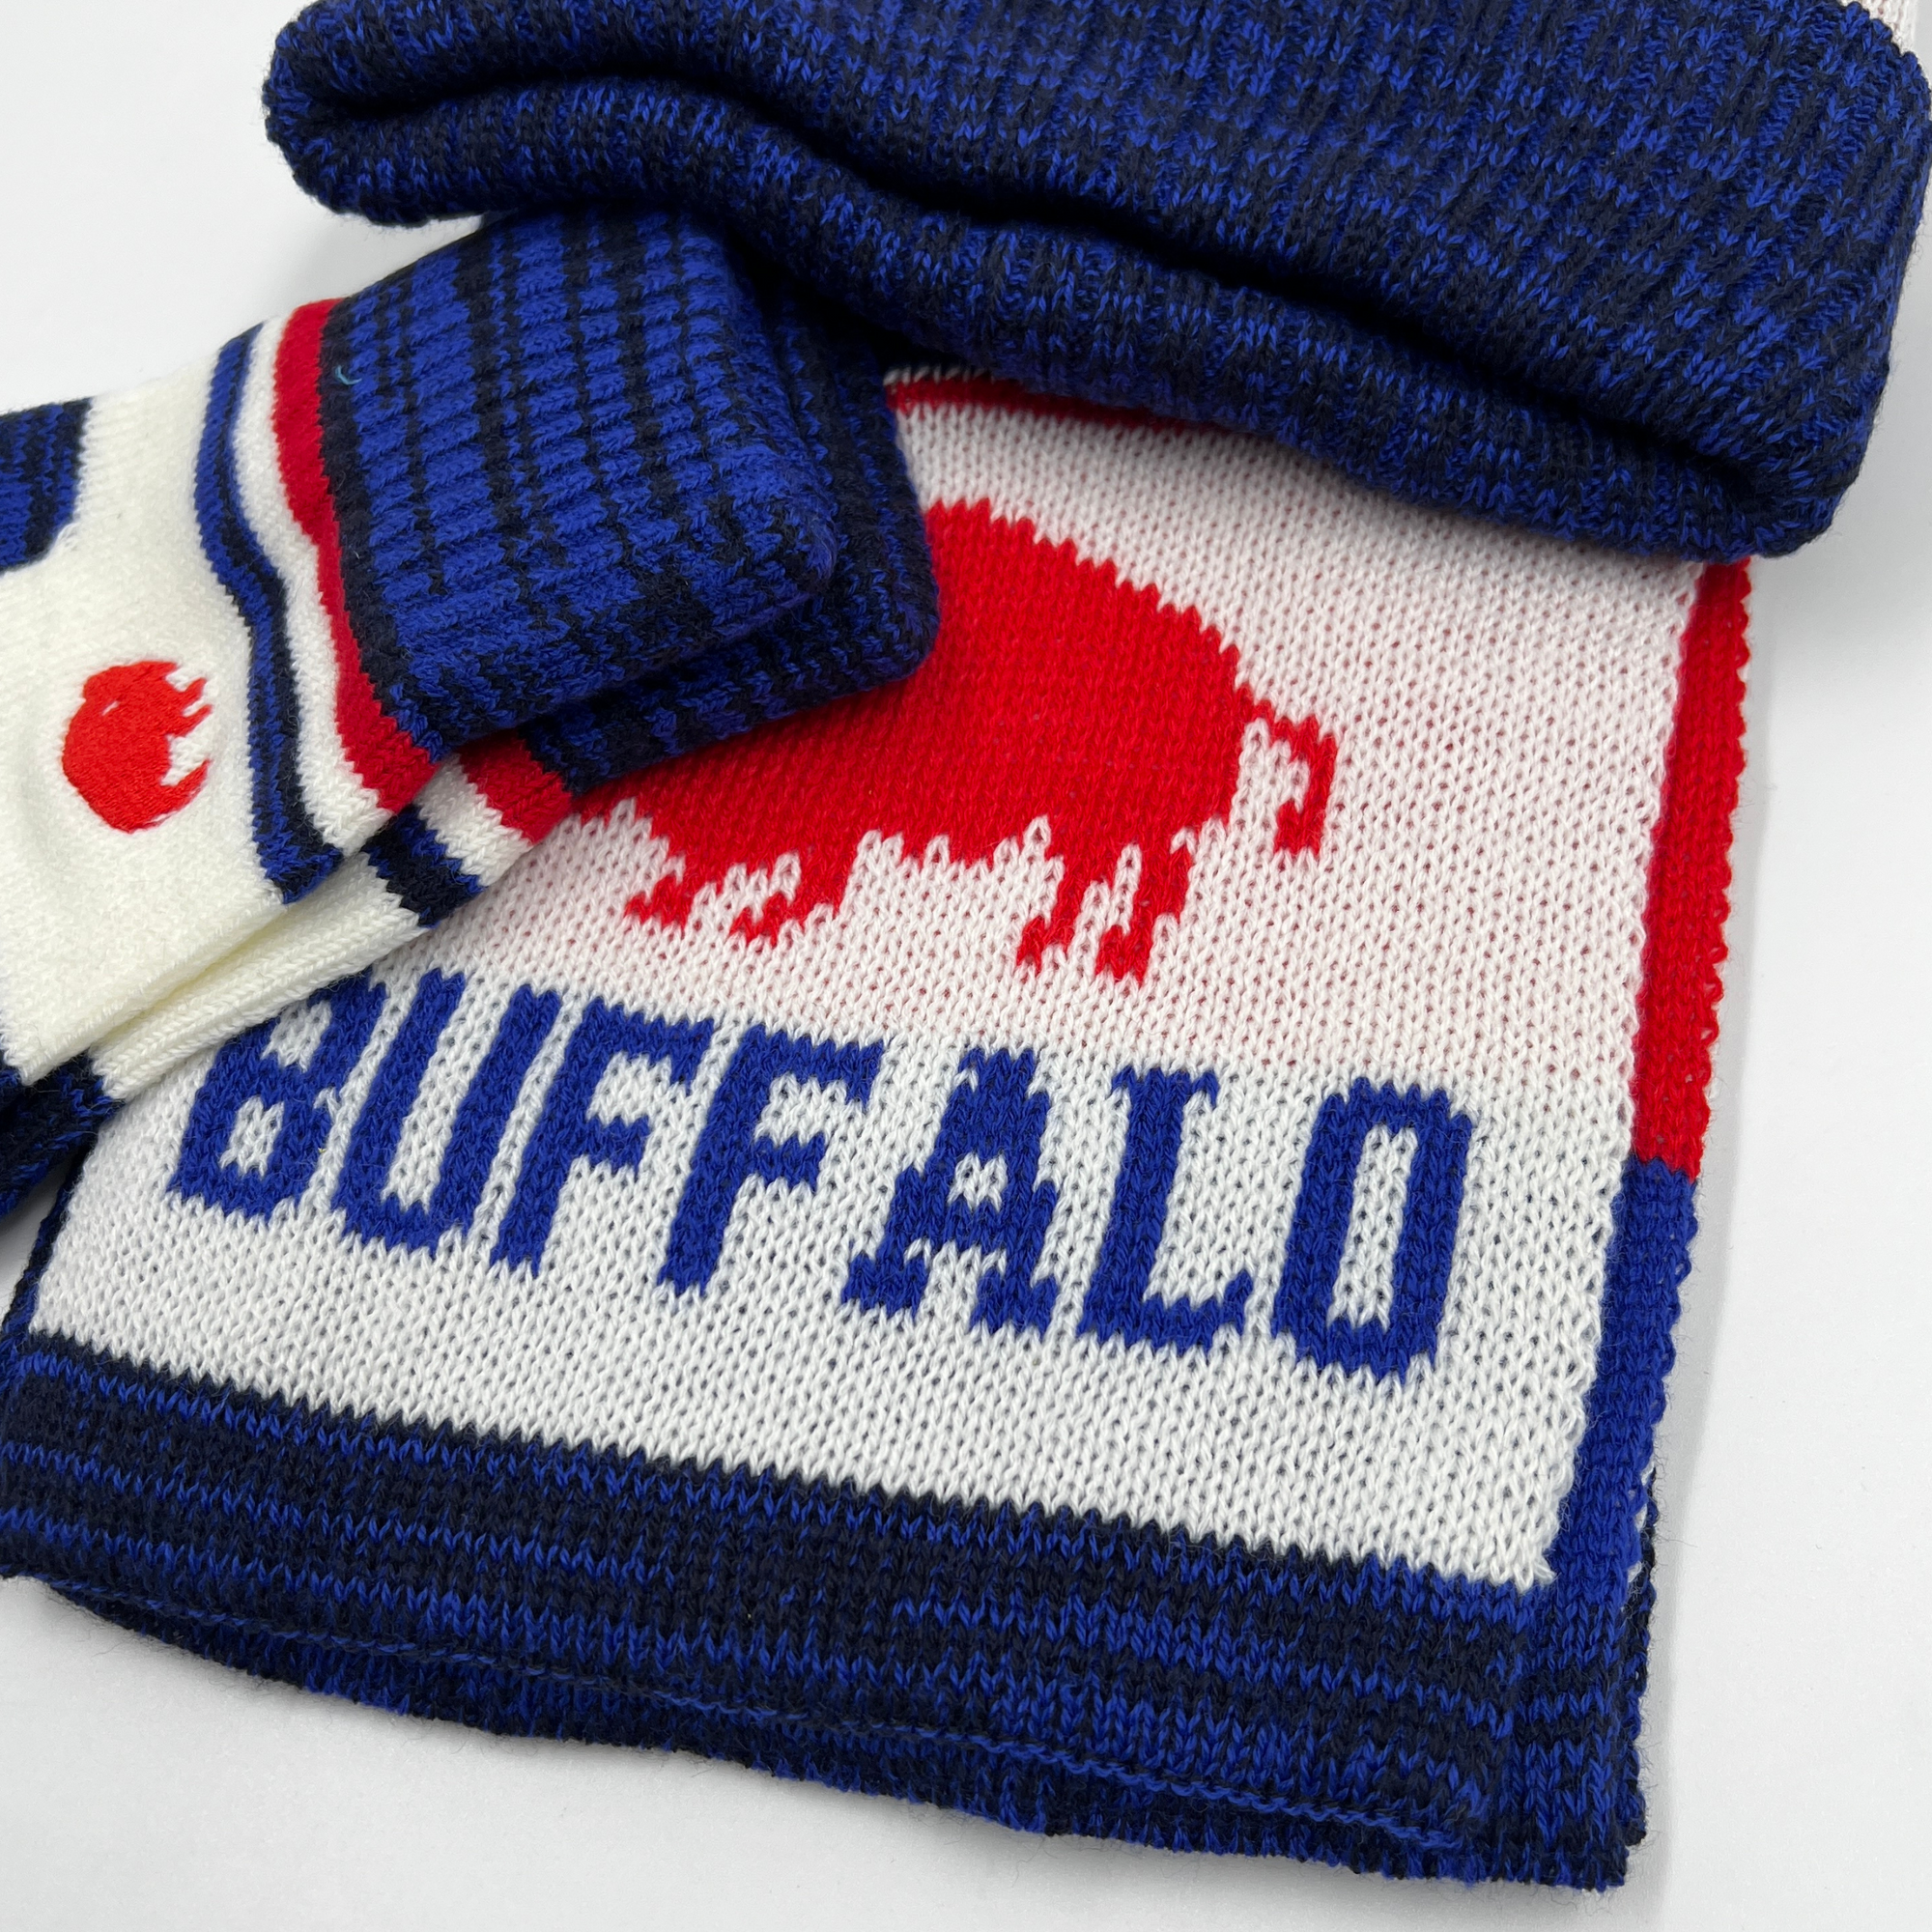 Buffalo 716 Red, White, and Blue Hat, Gloves, and Scarf Set